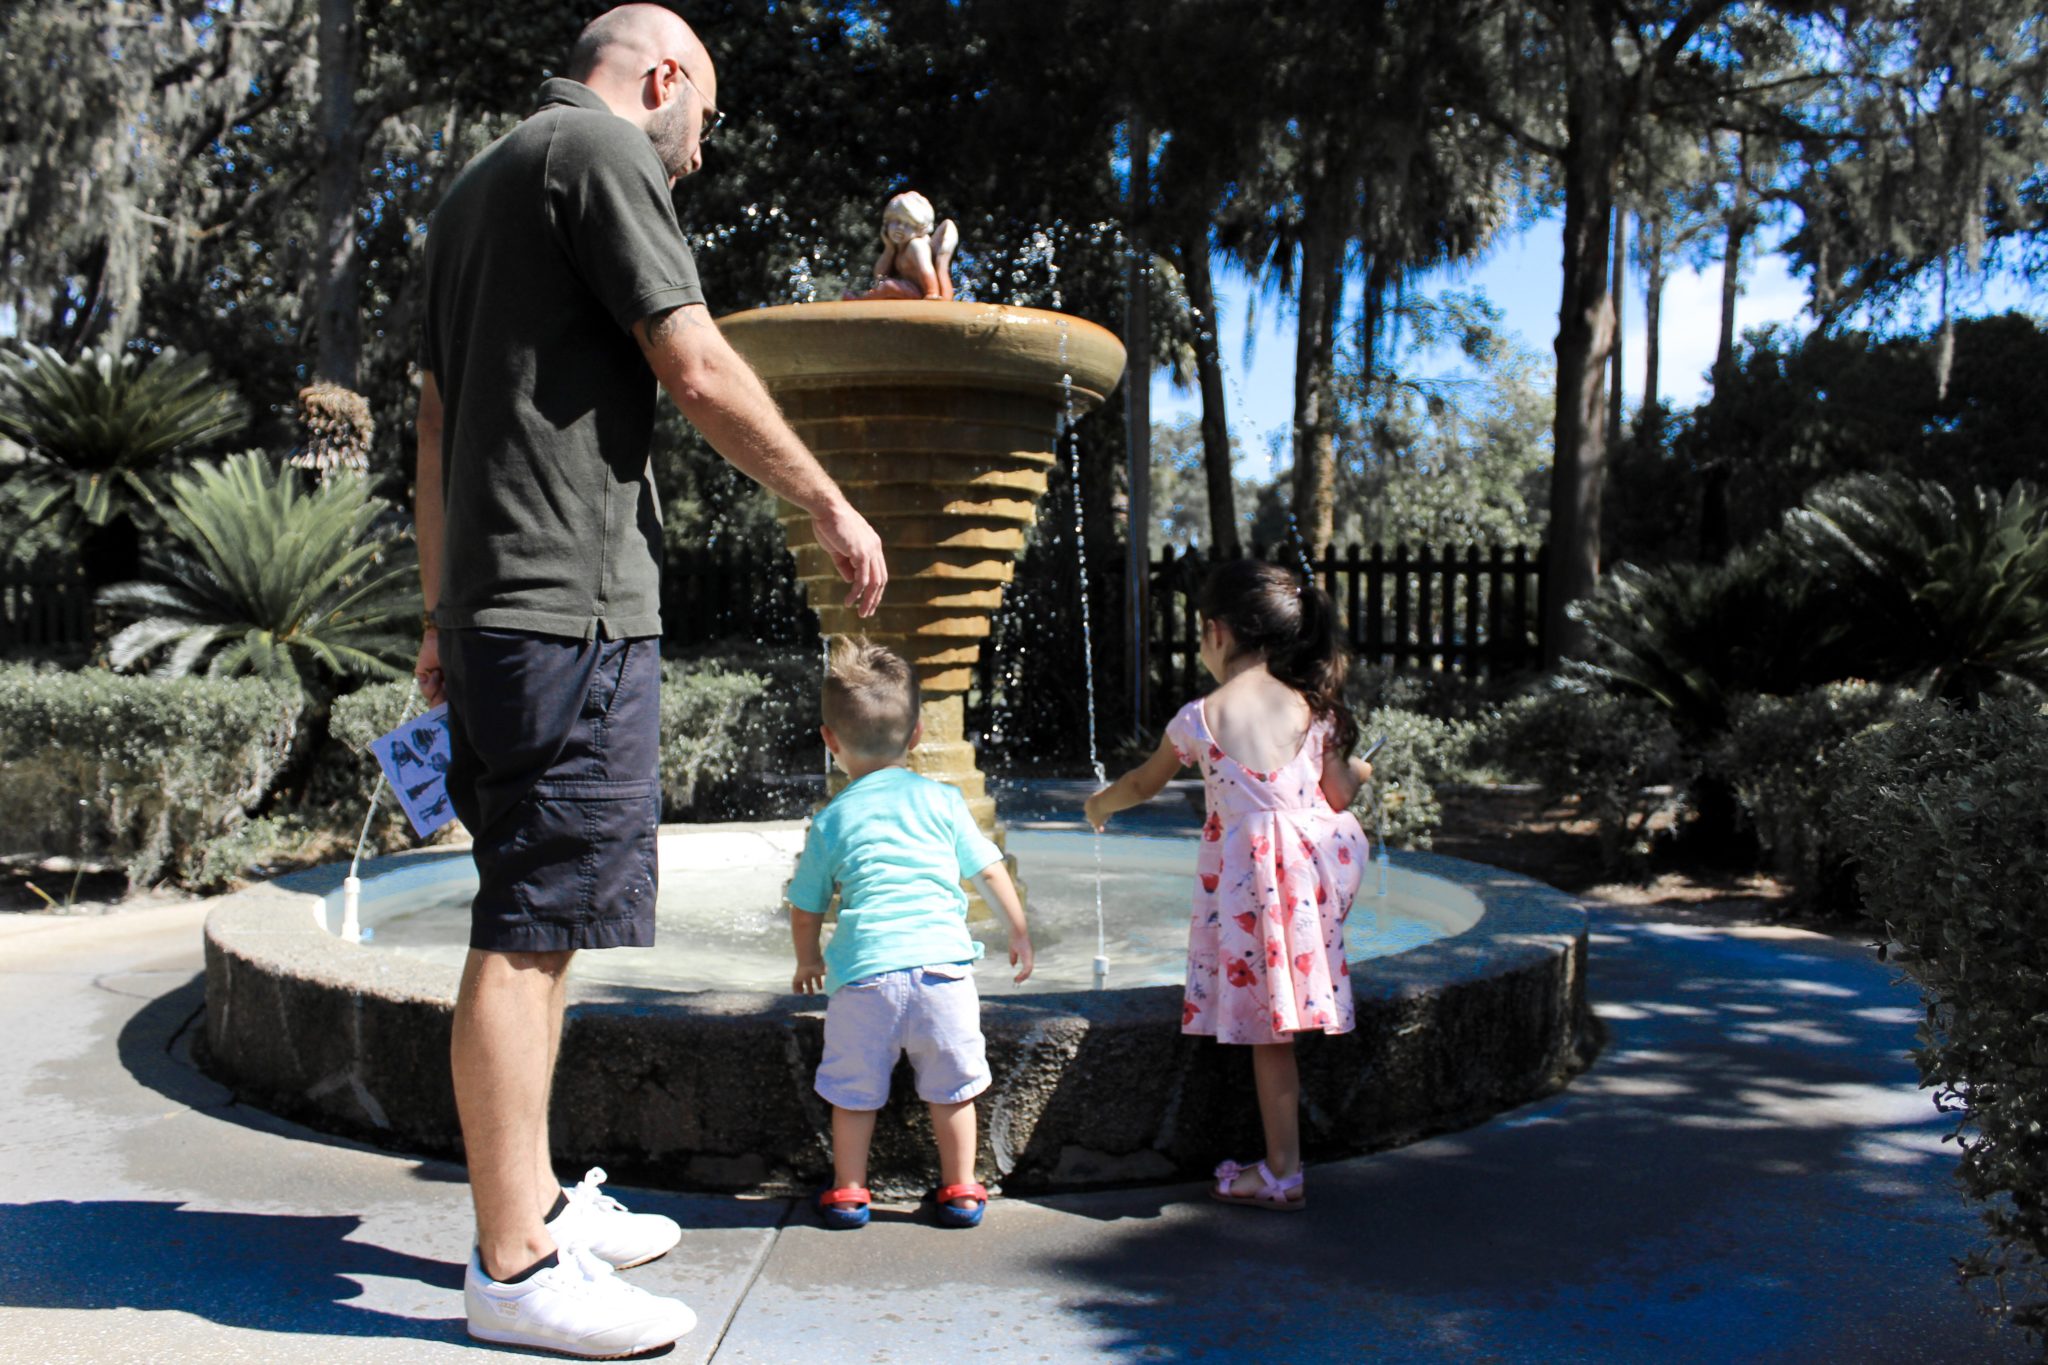 Visiting the Fountain of Youth in St. Augustine, FL - Tampa Llifestyle and Travel blogger, Crazy Life with Littles